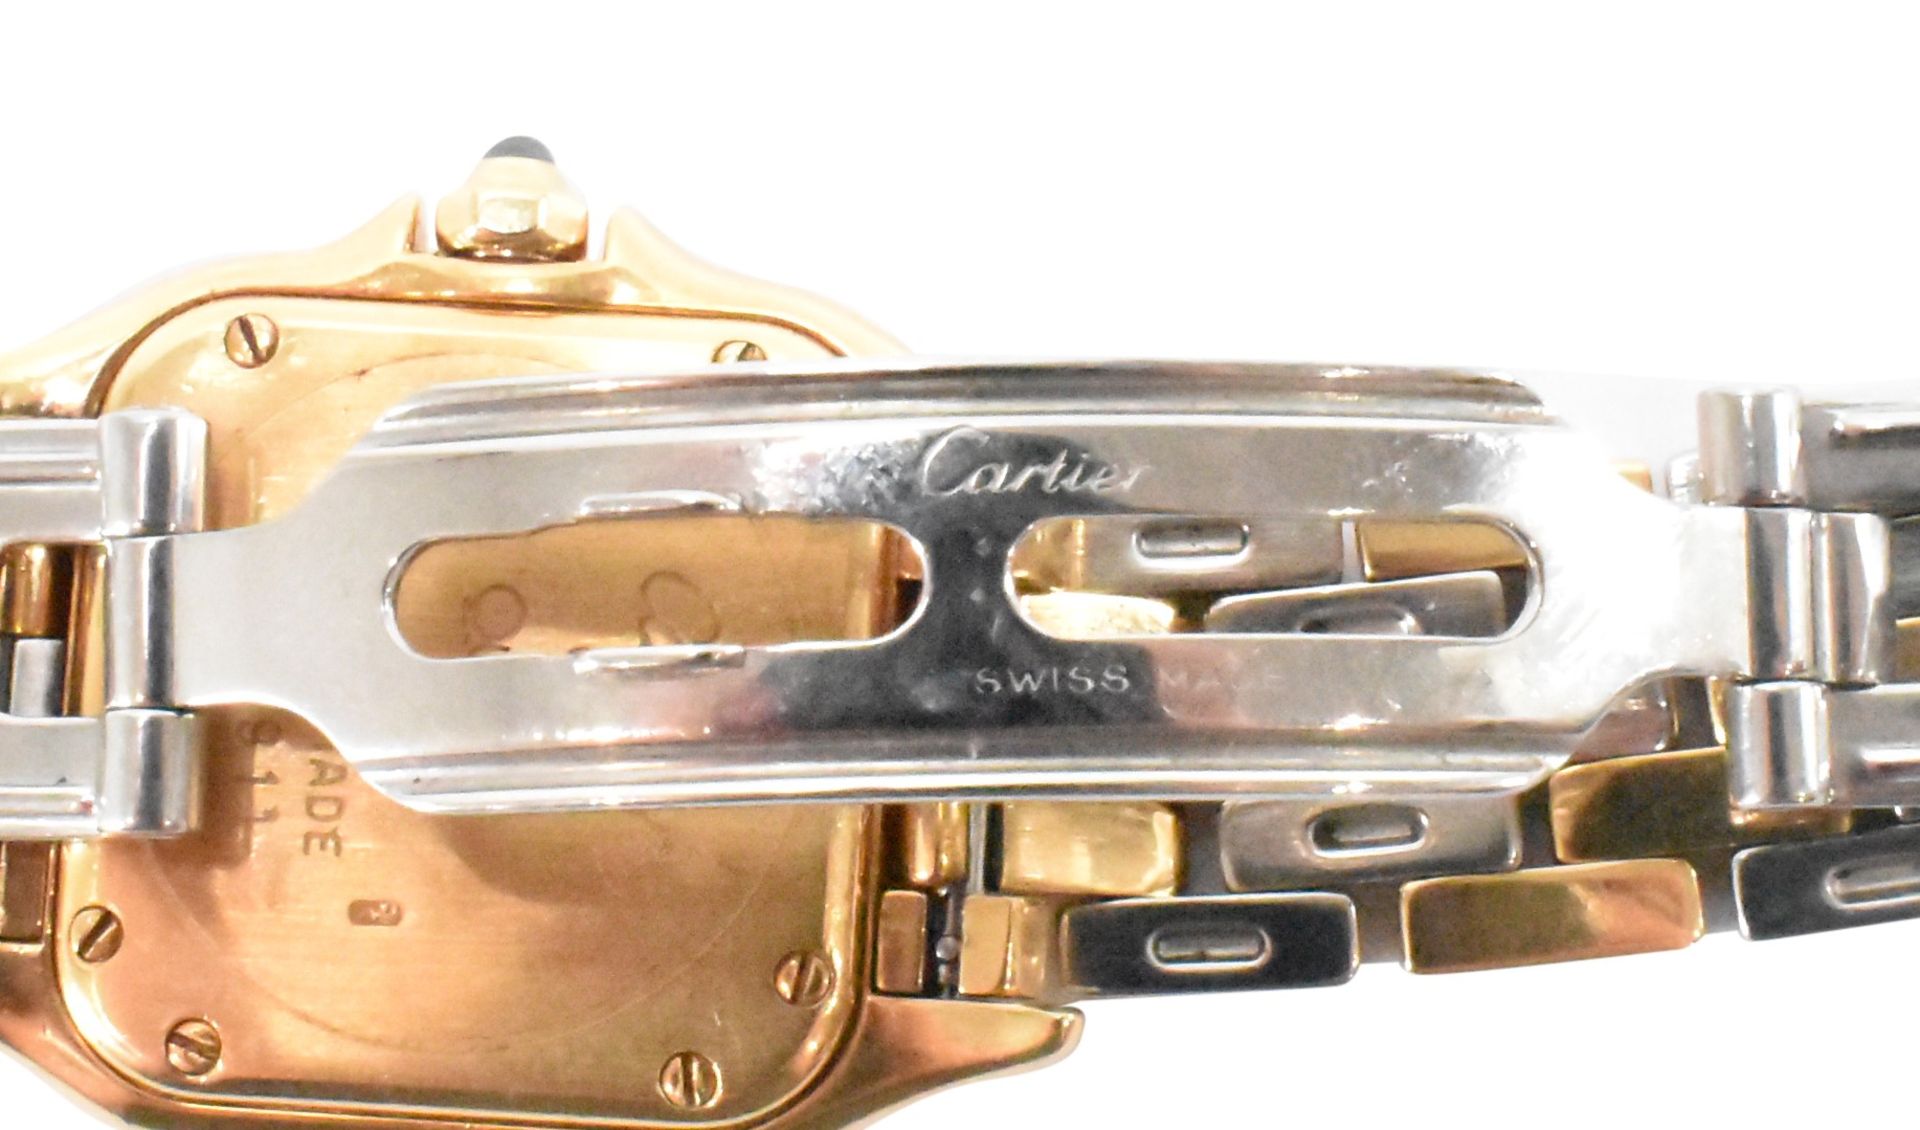 STEEL & GOLD CARTIER PANTHERE WRISTWATCH - Image 5 of 6